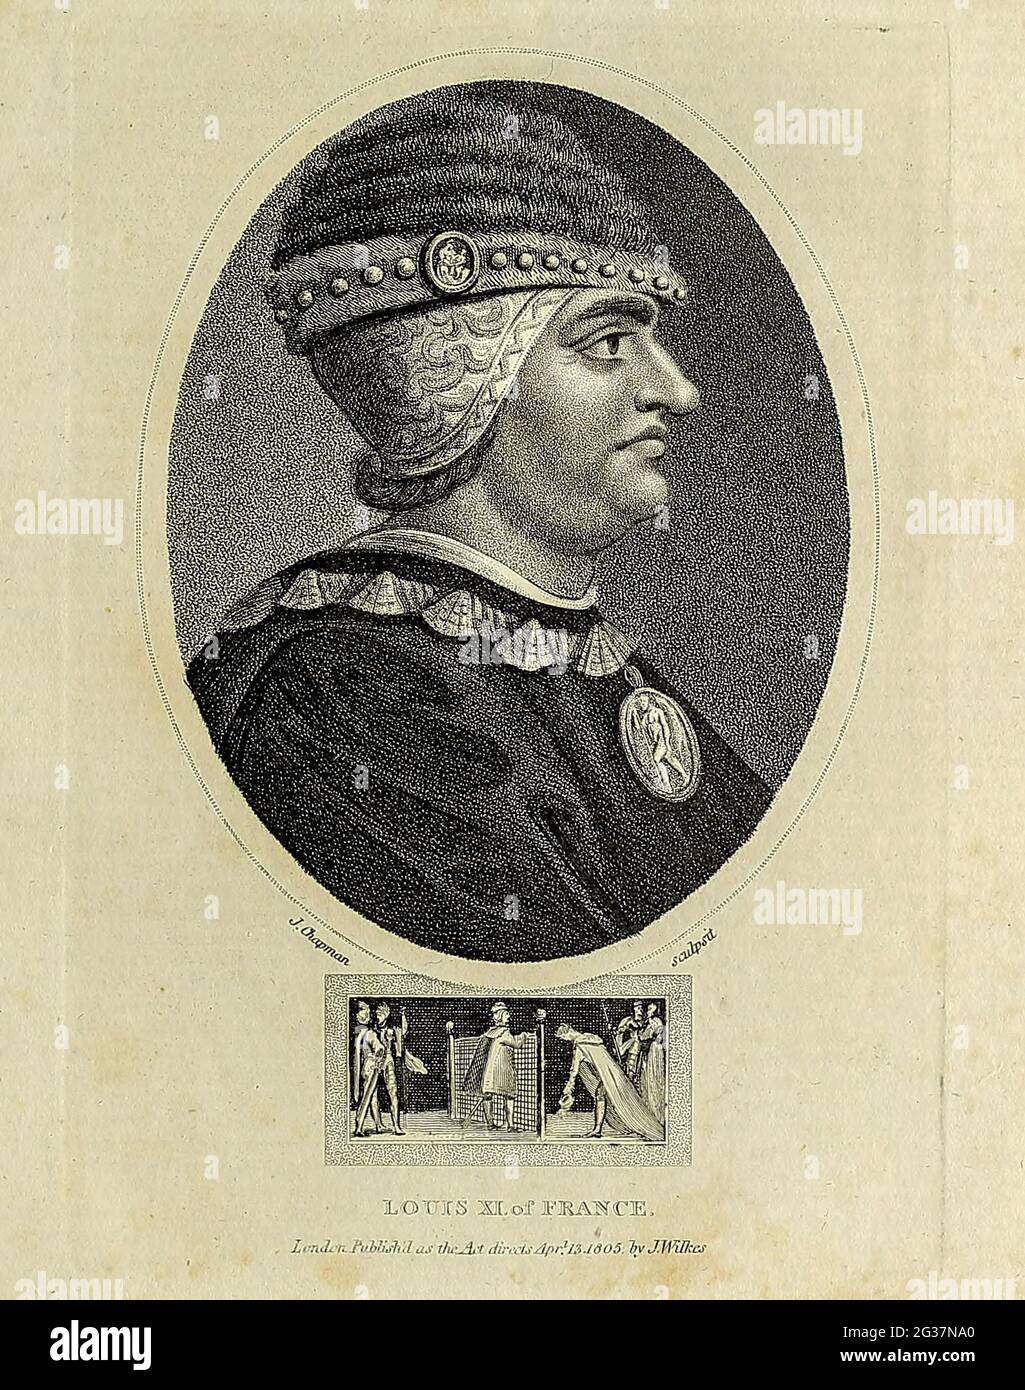 Louis XI of France Louis XI (3 July 1423 – 30 August 1483), called "Louis the Prudent" (French: le Prudent), was King of France from 1461 to 1483. He succeeded his father, Charles VII. Copperplate engraving From the Encyclopaedia Londinensis or, Universal dictionary of arts, sciences, and literature; Volume VII;  Edited by Wilkes, John. Published in London in 1810 Stock Photo